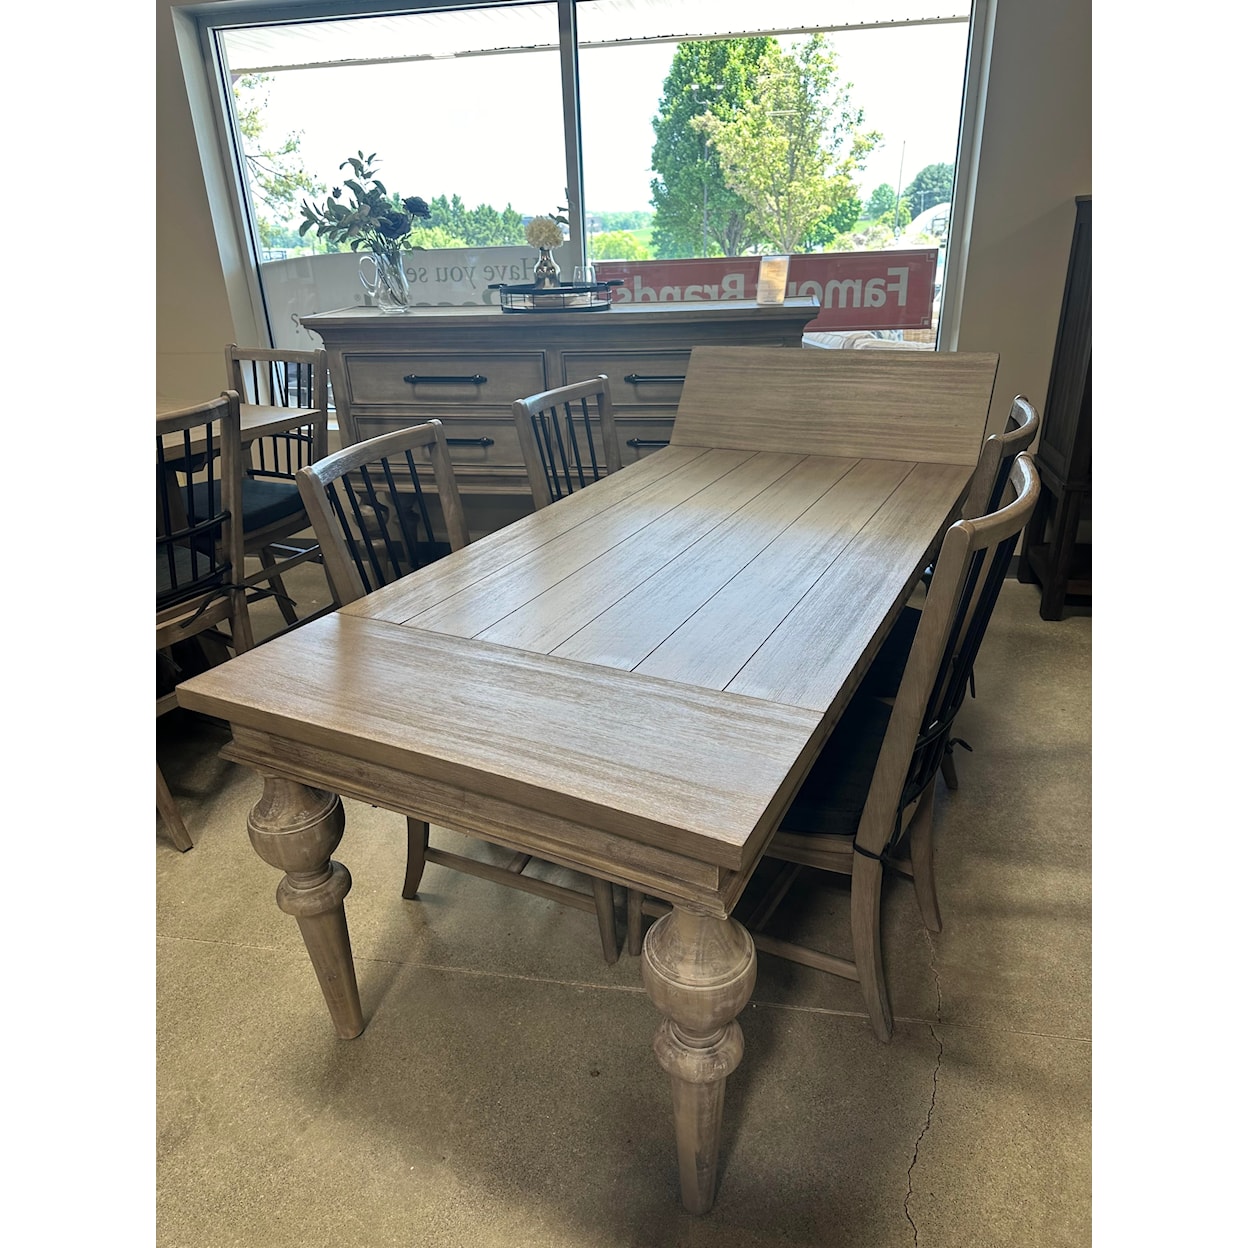 DesignWorks Furniture Summer Place Dining Table with 4 Chairs